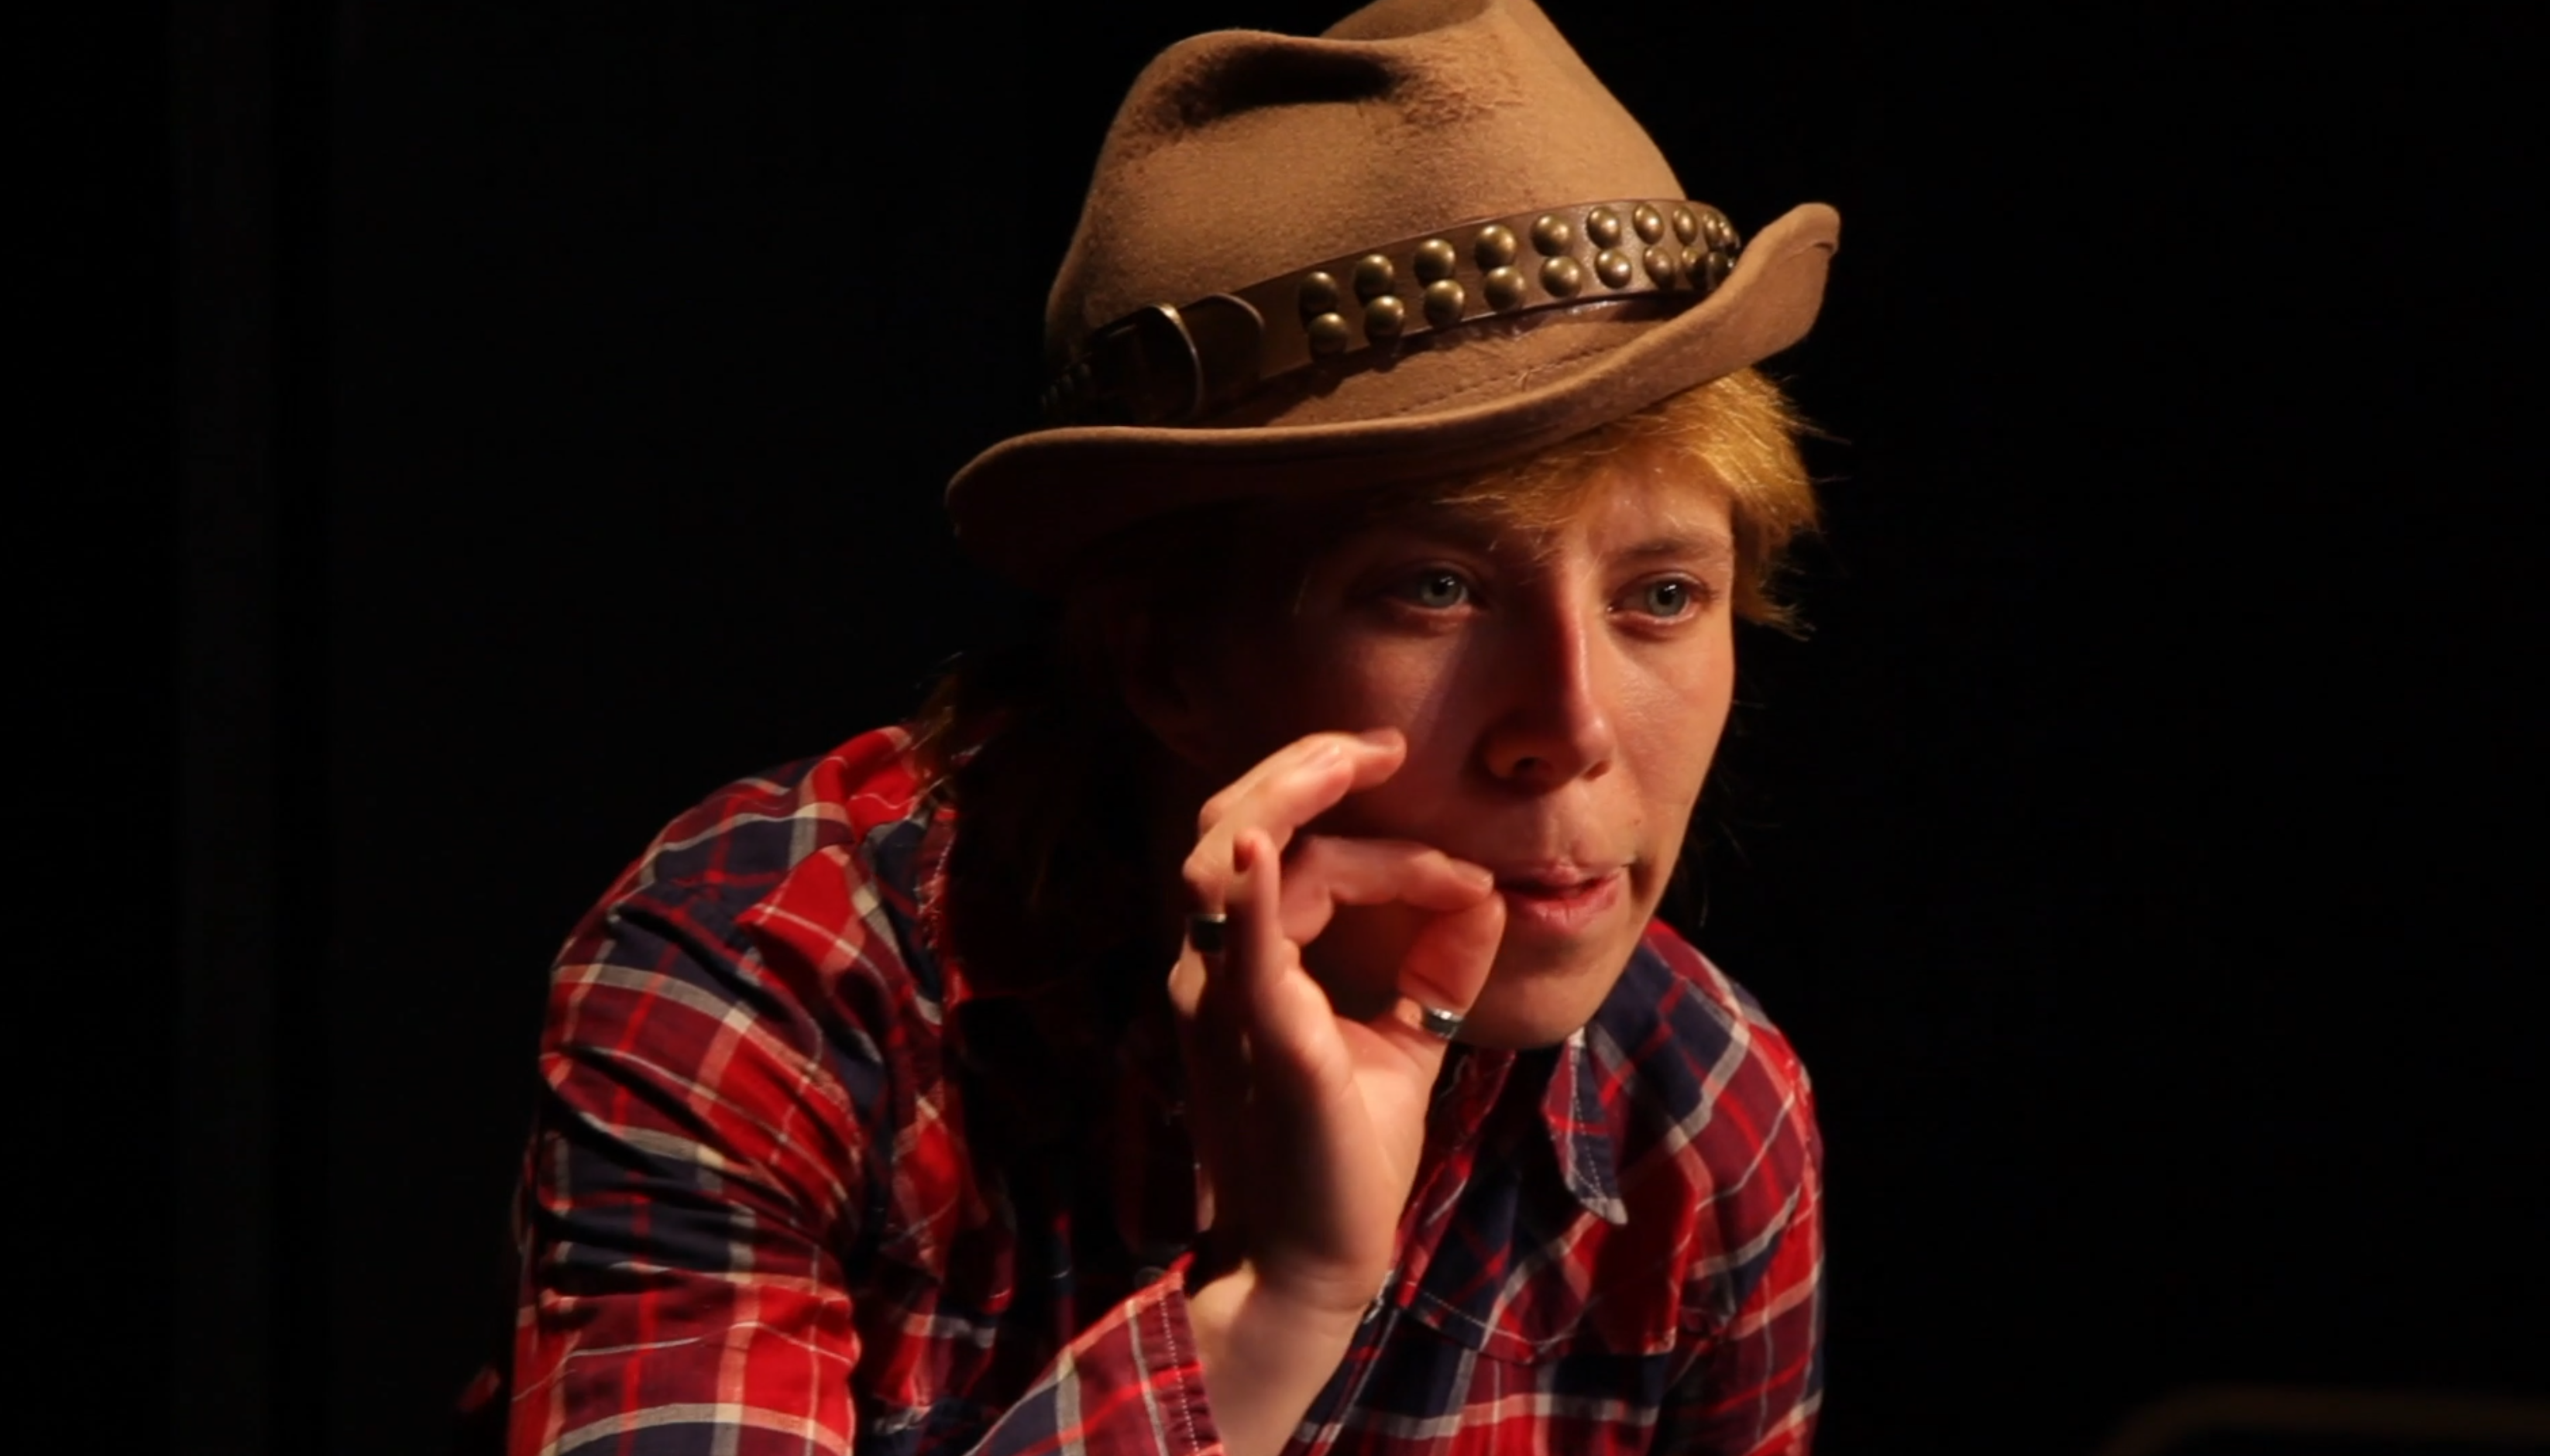 A person with cowboy hat and red and black plaid shirt imitates smoking a cigarette